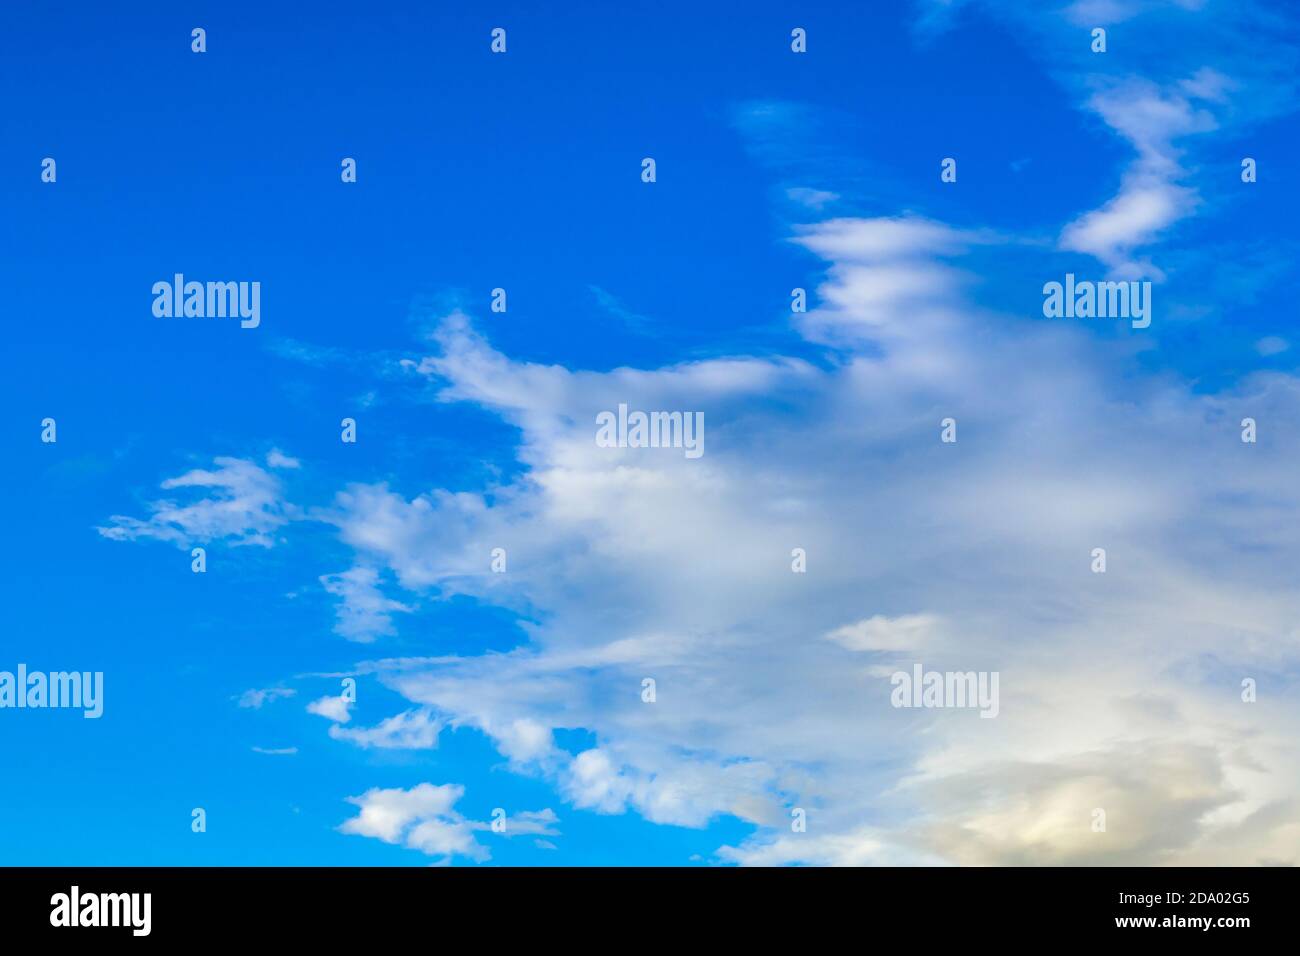 Blue sky with white clouds, natural background Stock Photo